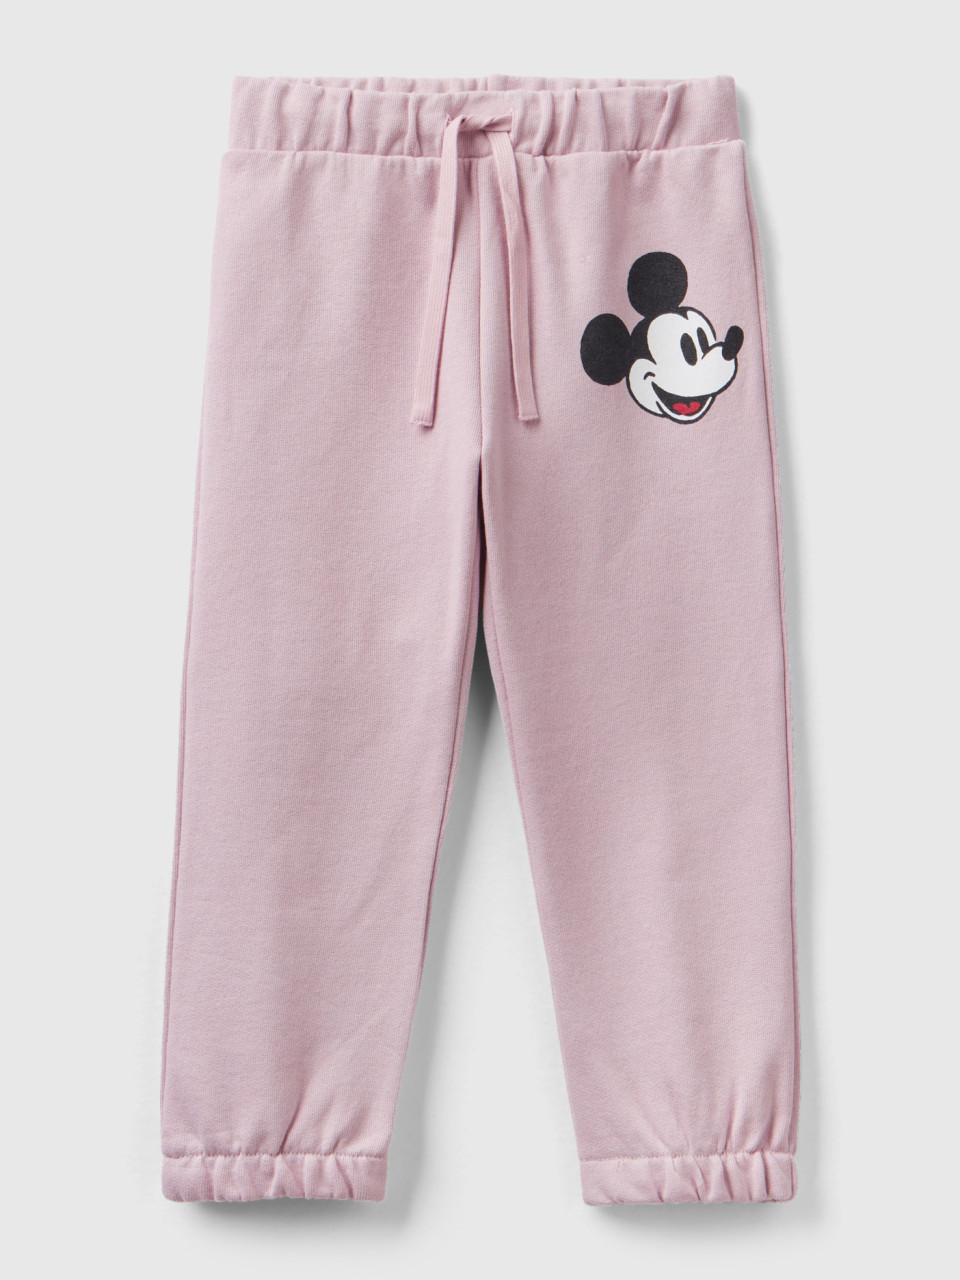 Benetton, Pink Mickey Mouse Joggers, Soft Pink, Kids